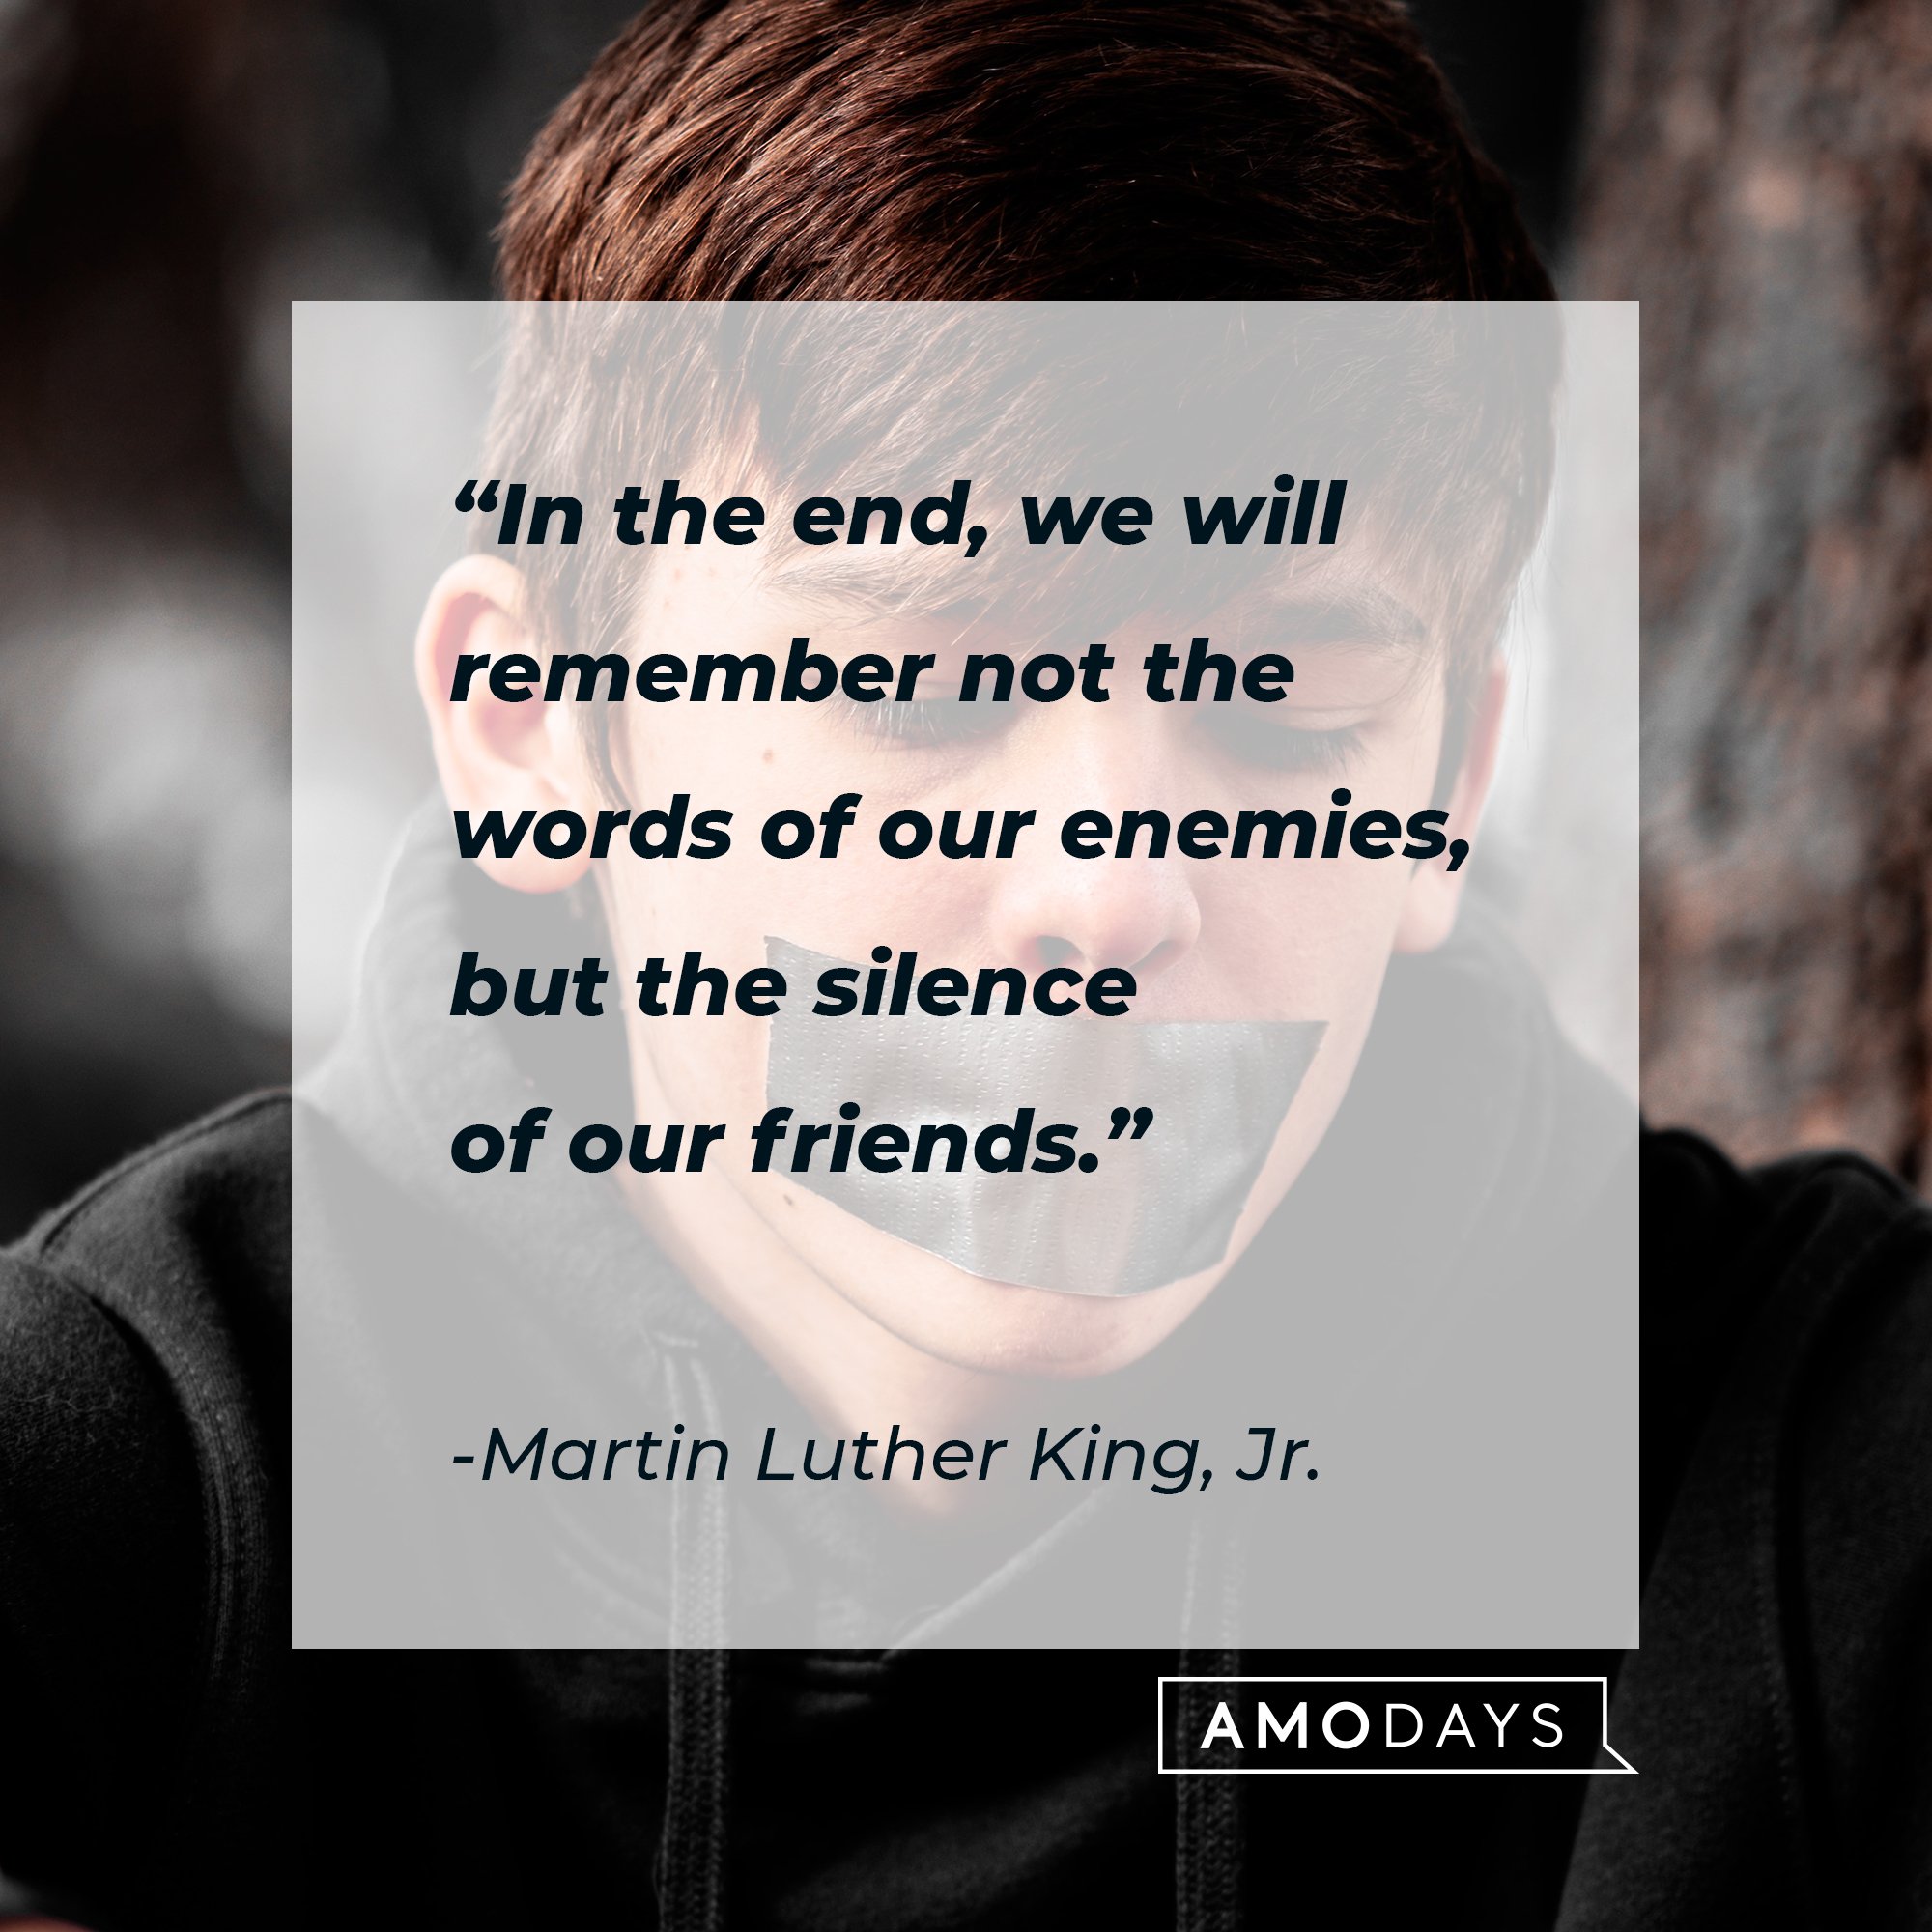 “In the end, we will remember not the words of our enemies, but the silence of our friends.”  | Image: AmoDays